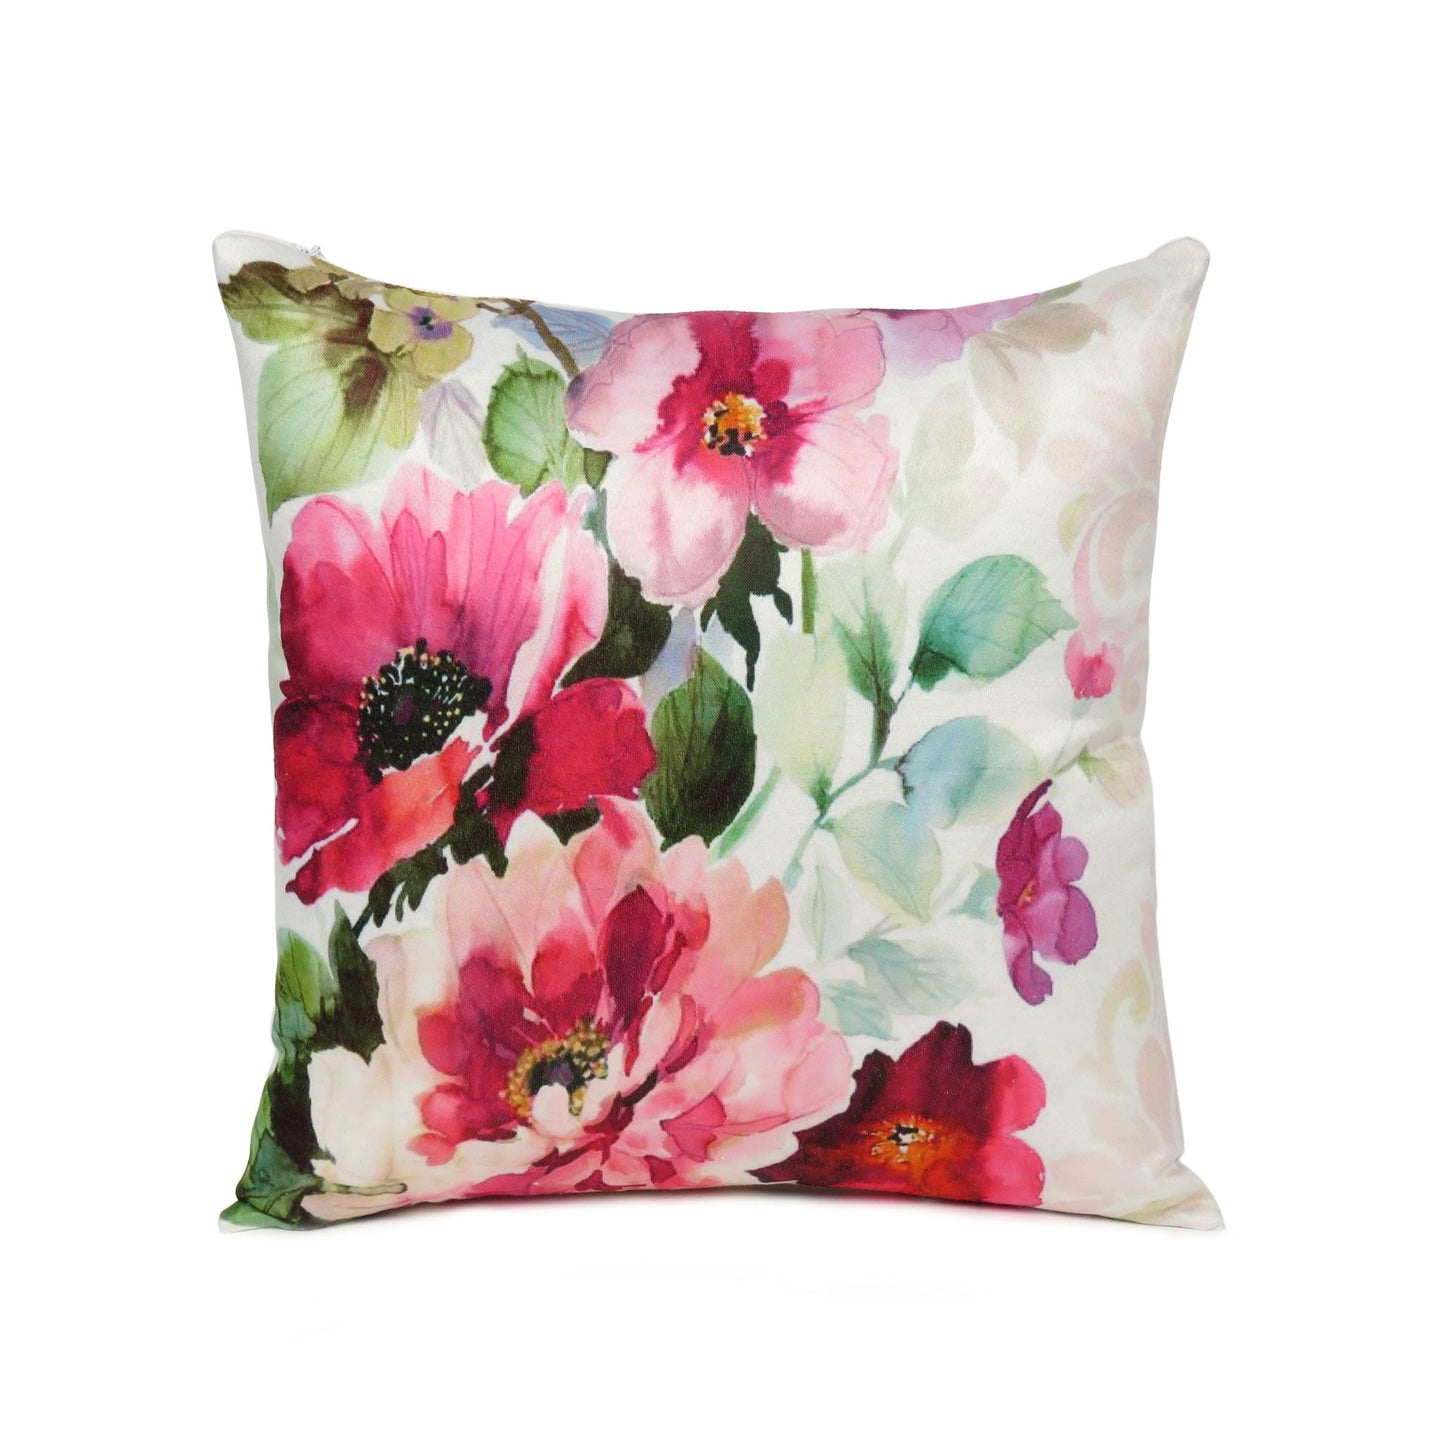 Multicolor Floral Printed Cushion Cover in Set of 2